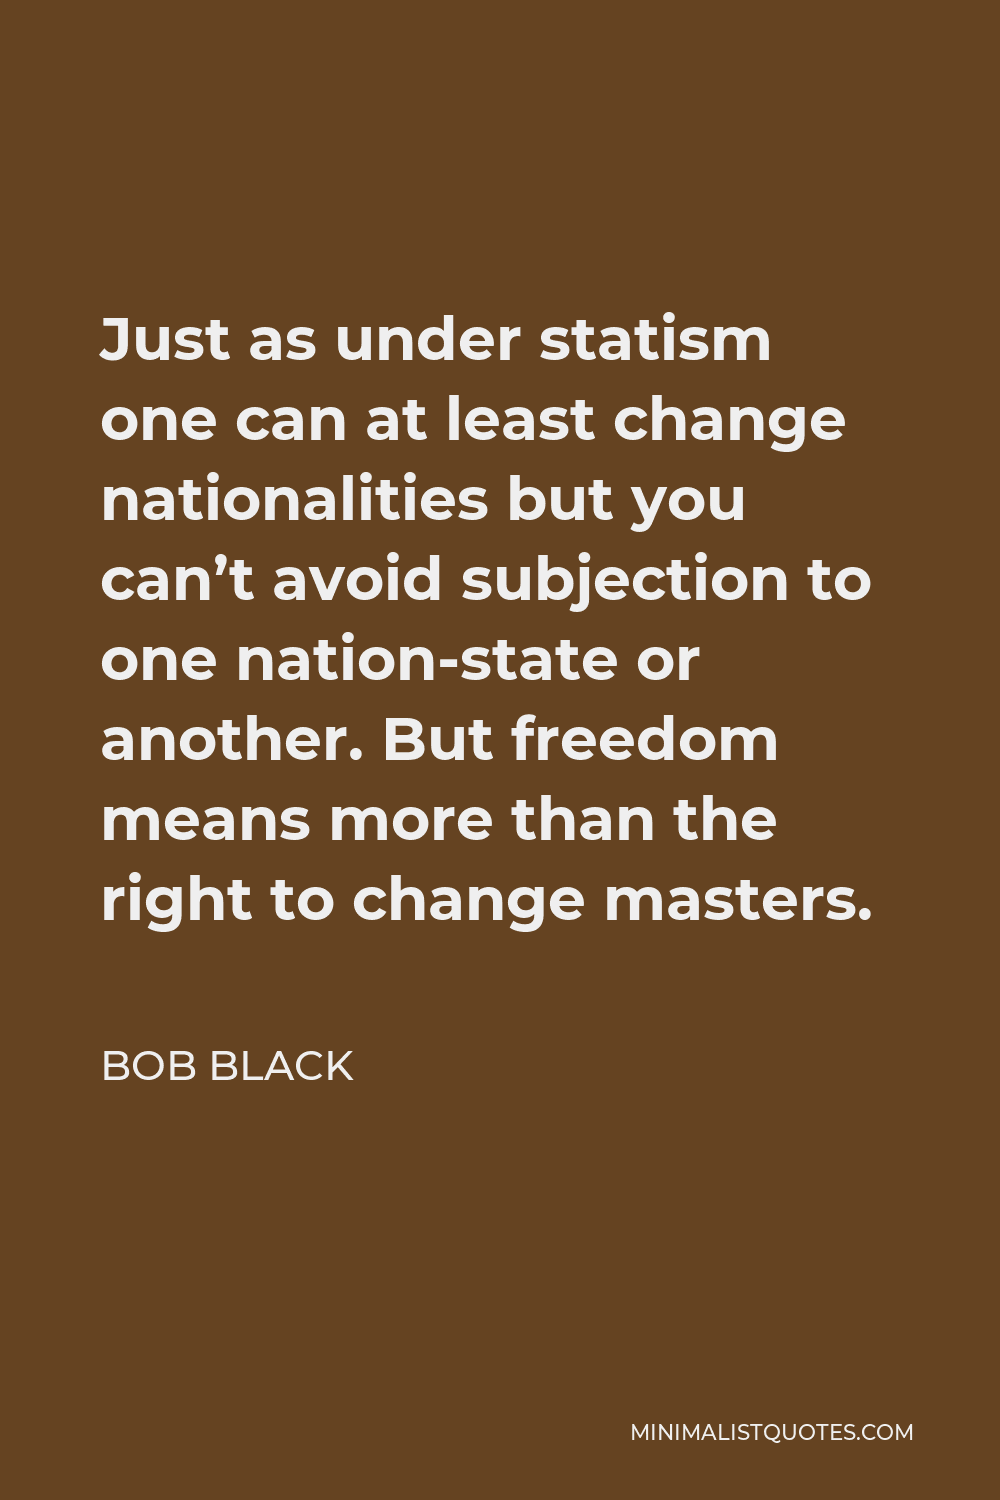 Bob Black Quote - Just as under statism one can at least change nationalities but you can’t avoid subjection to one nation-state or another. But freedom means more than the right to change masters.